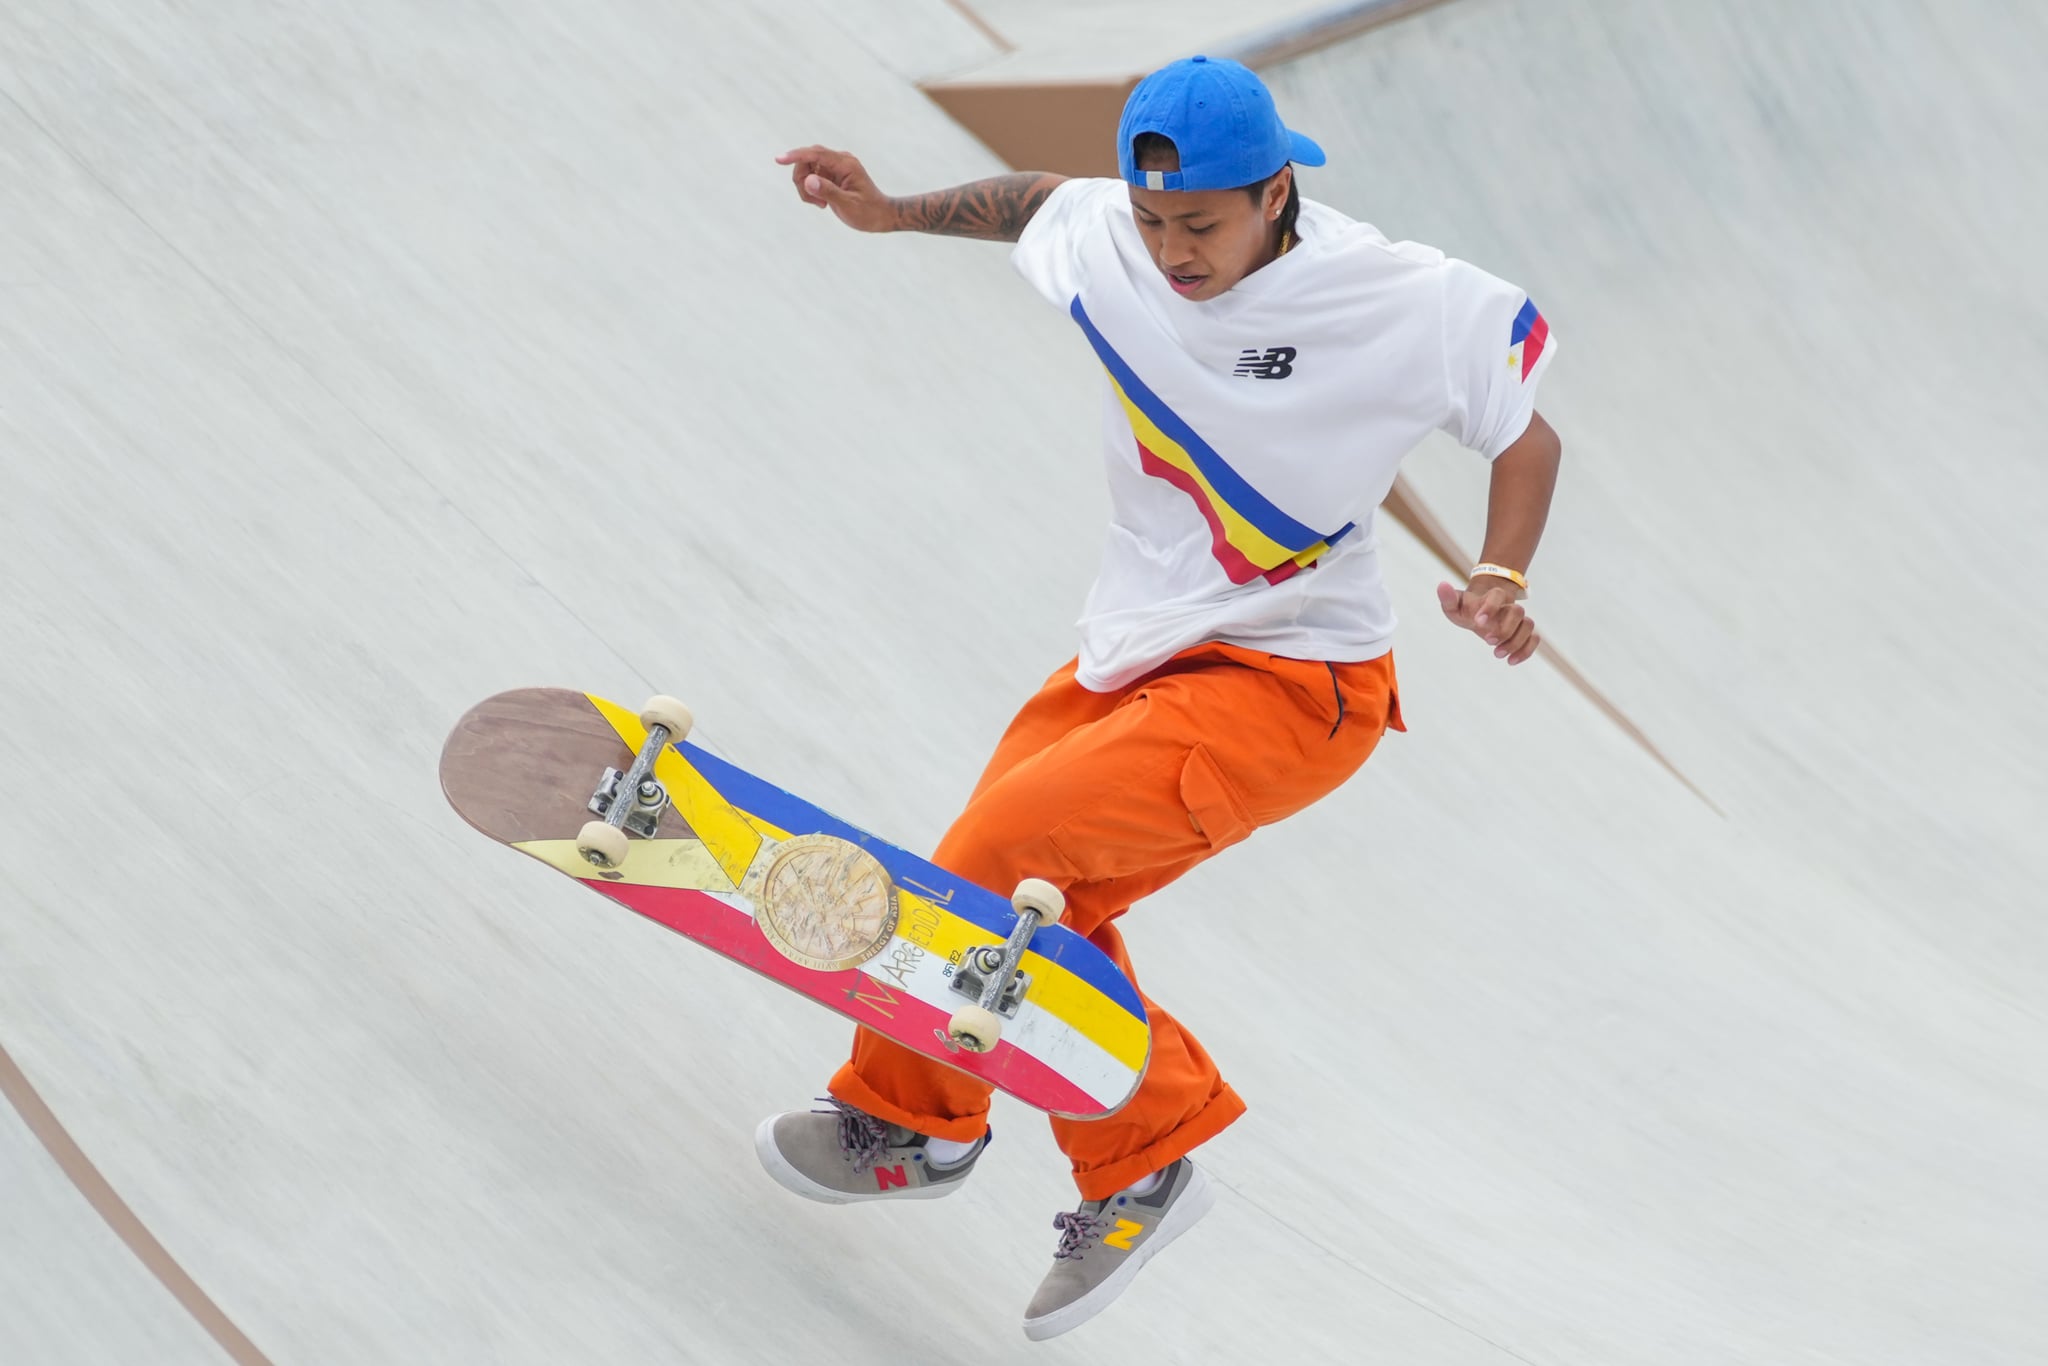 The Skateboarders at the Tokyo Olympics Have the | POPSUGAR Fashion